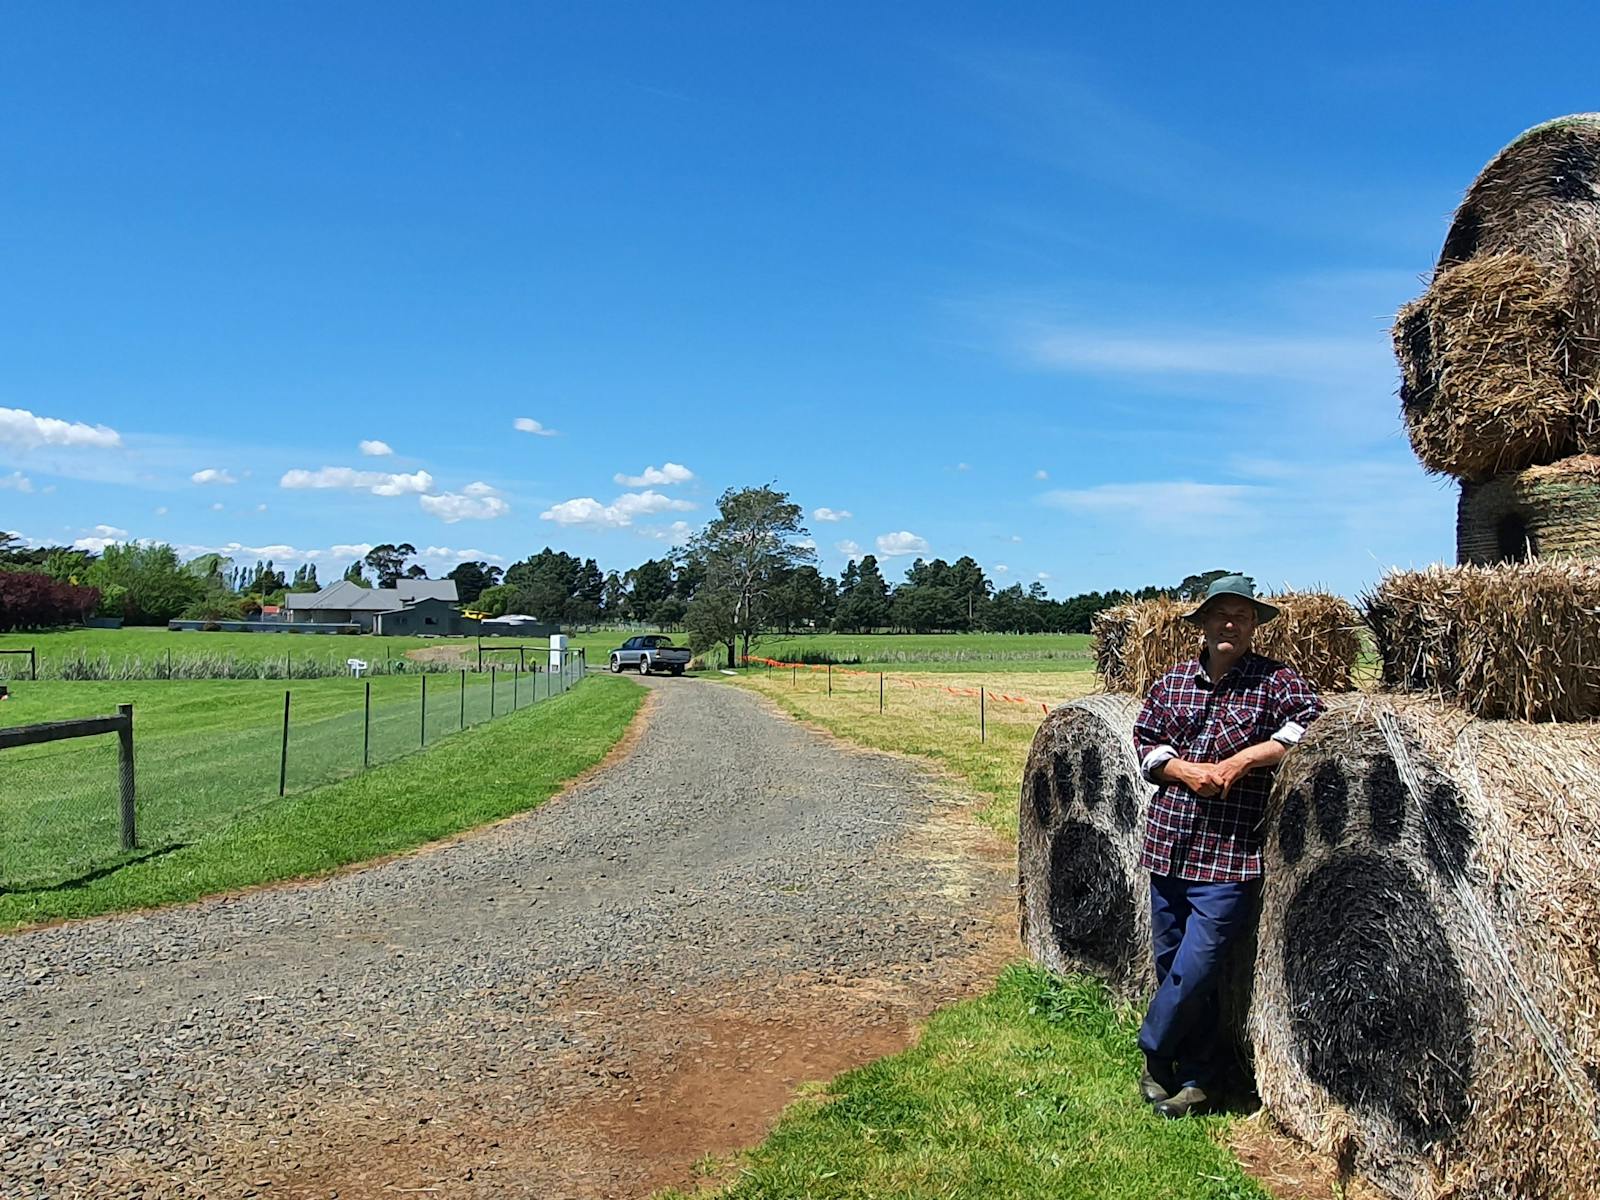 Big Ted, the hay bale bear welcomes visitors to Hagley RV Farm Stay